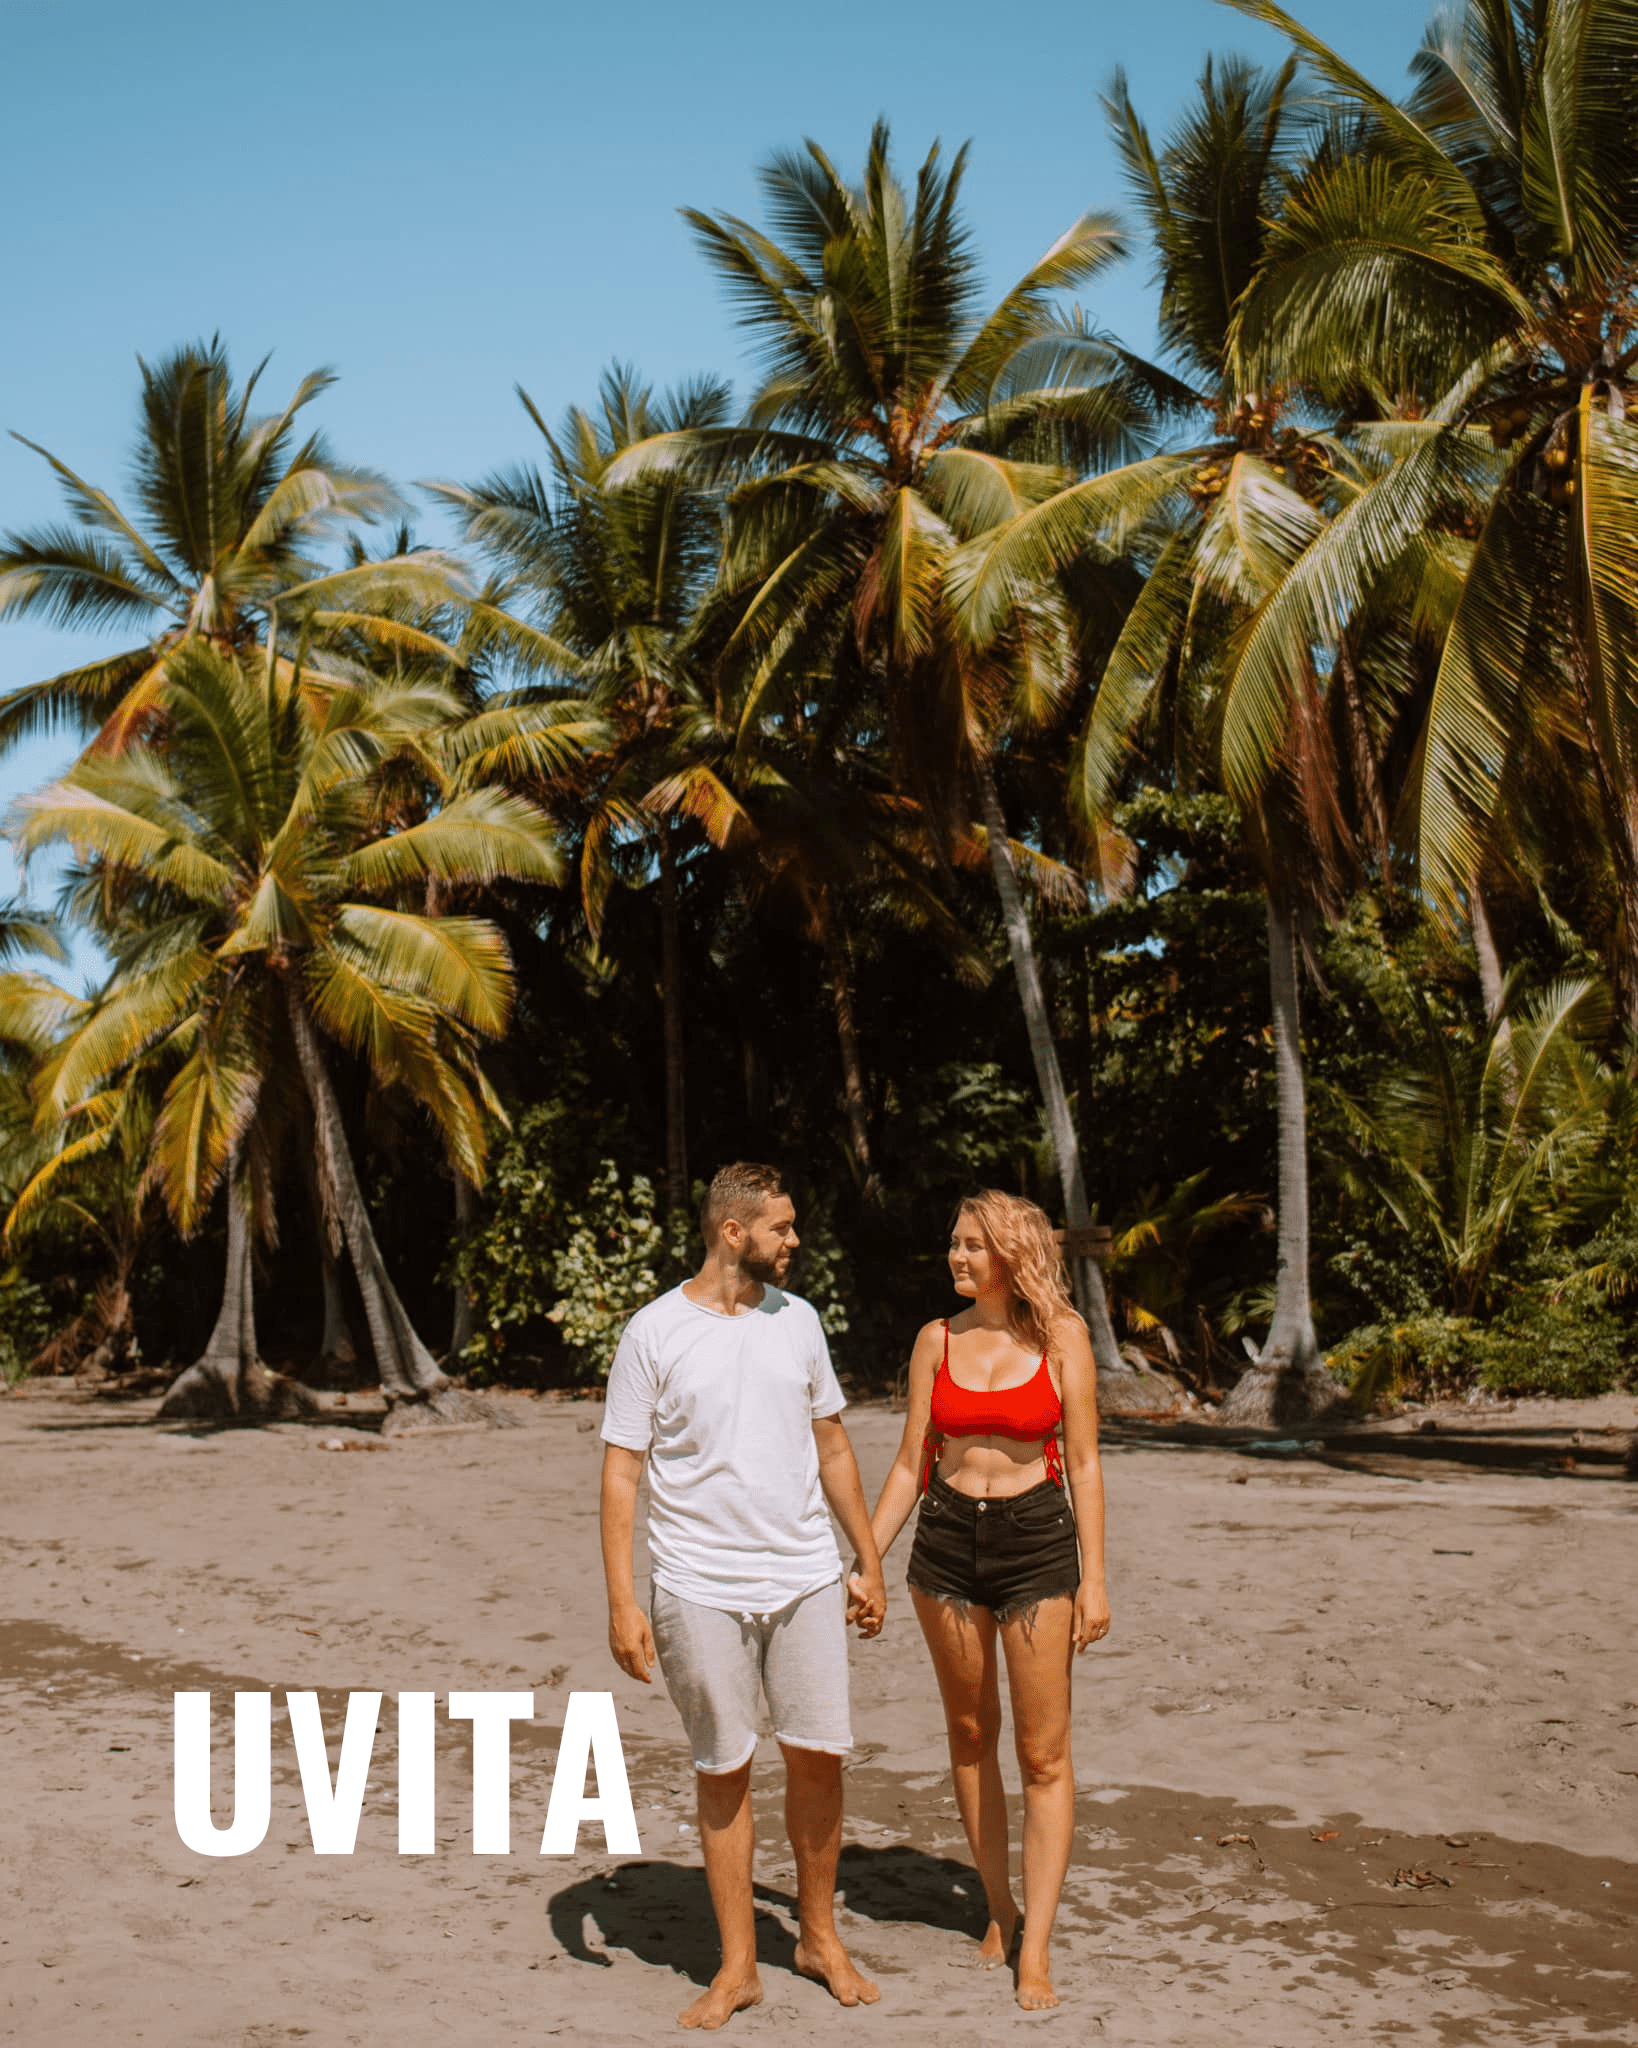 5 Top Things to Do in Uvita, Costa Rica cairns